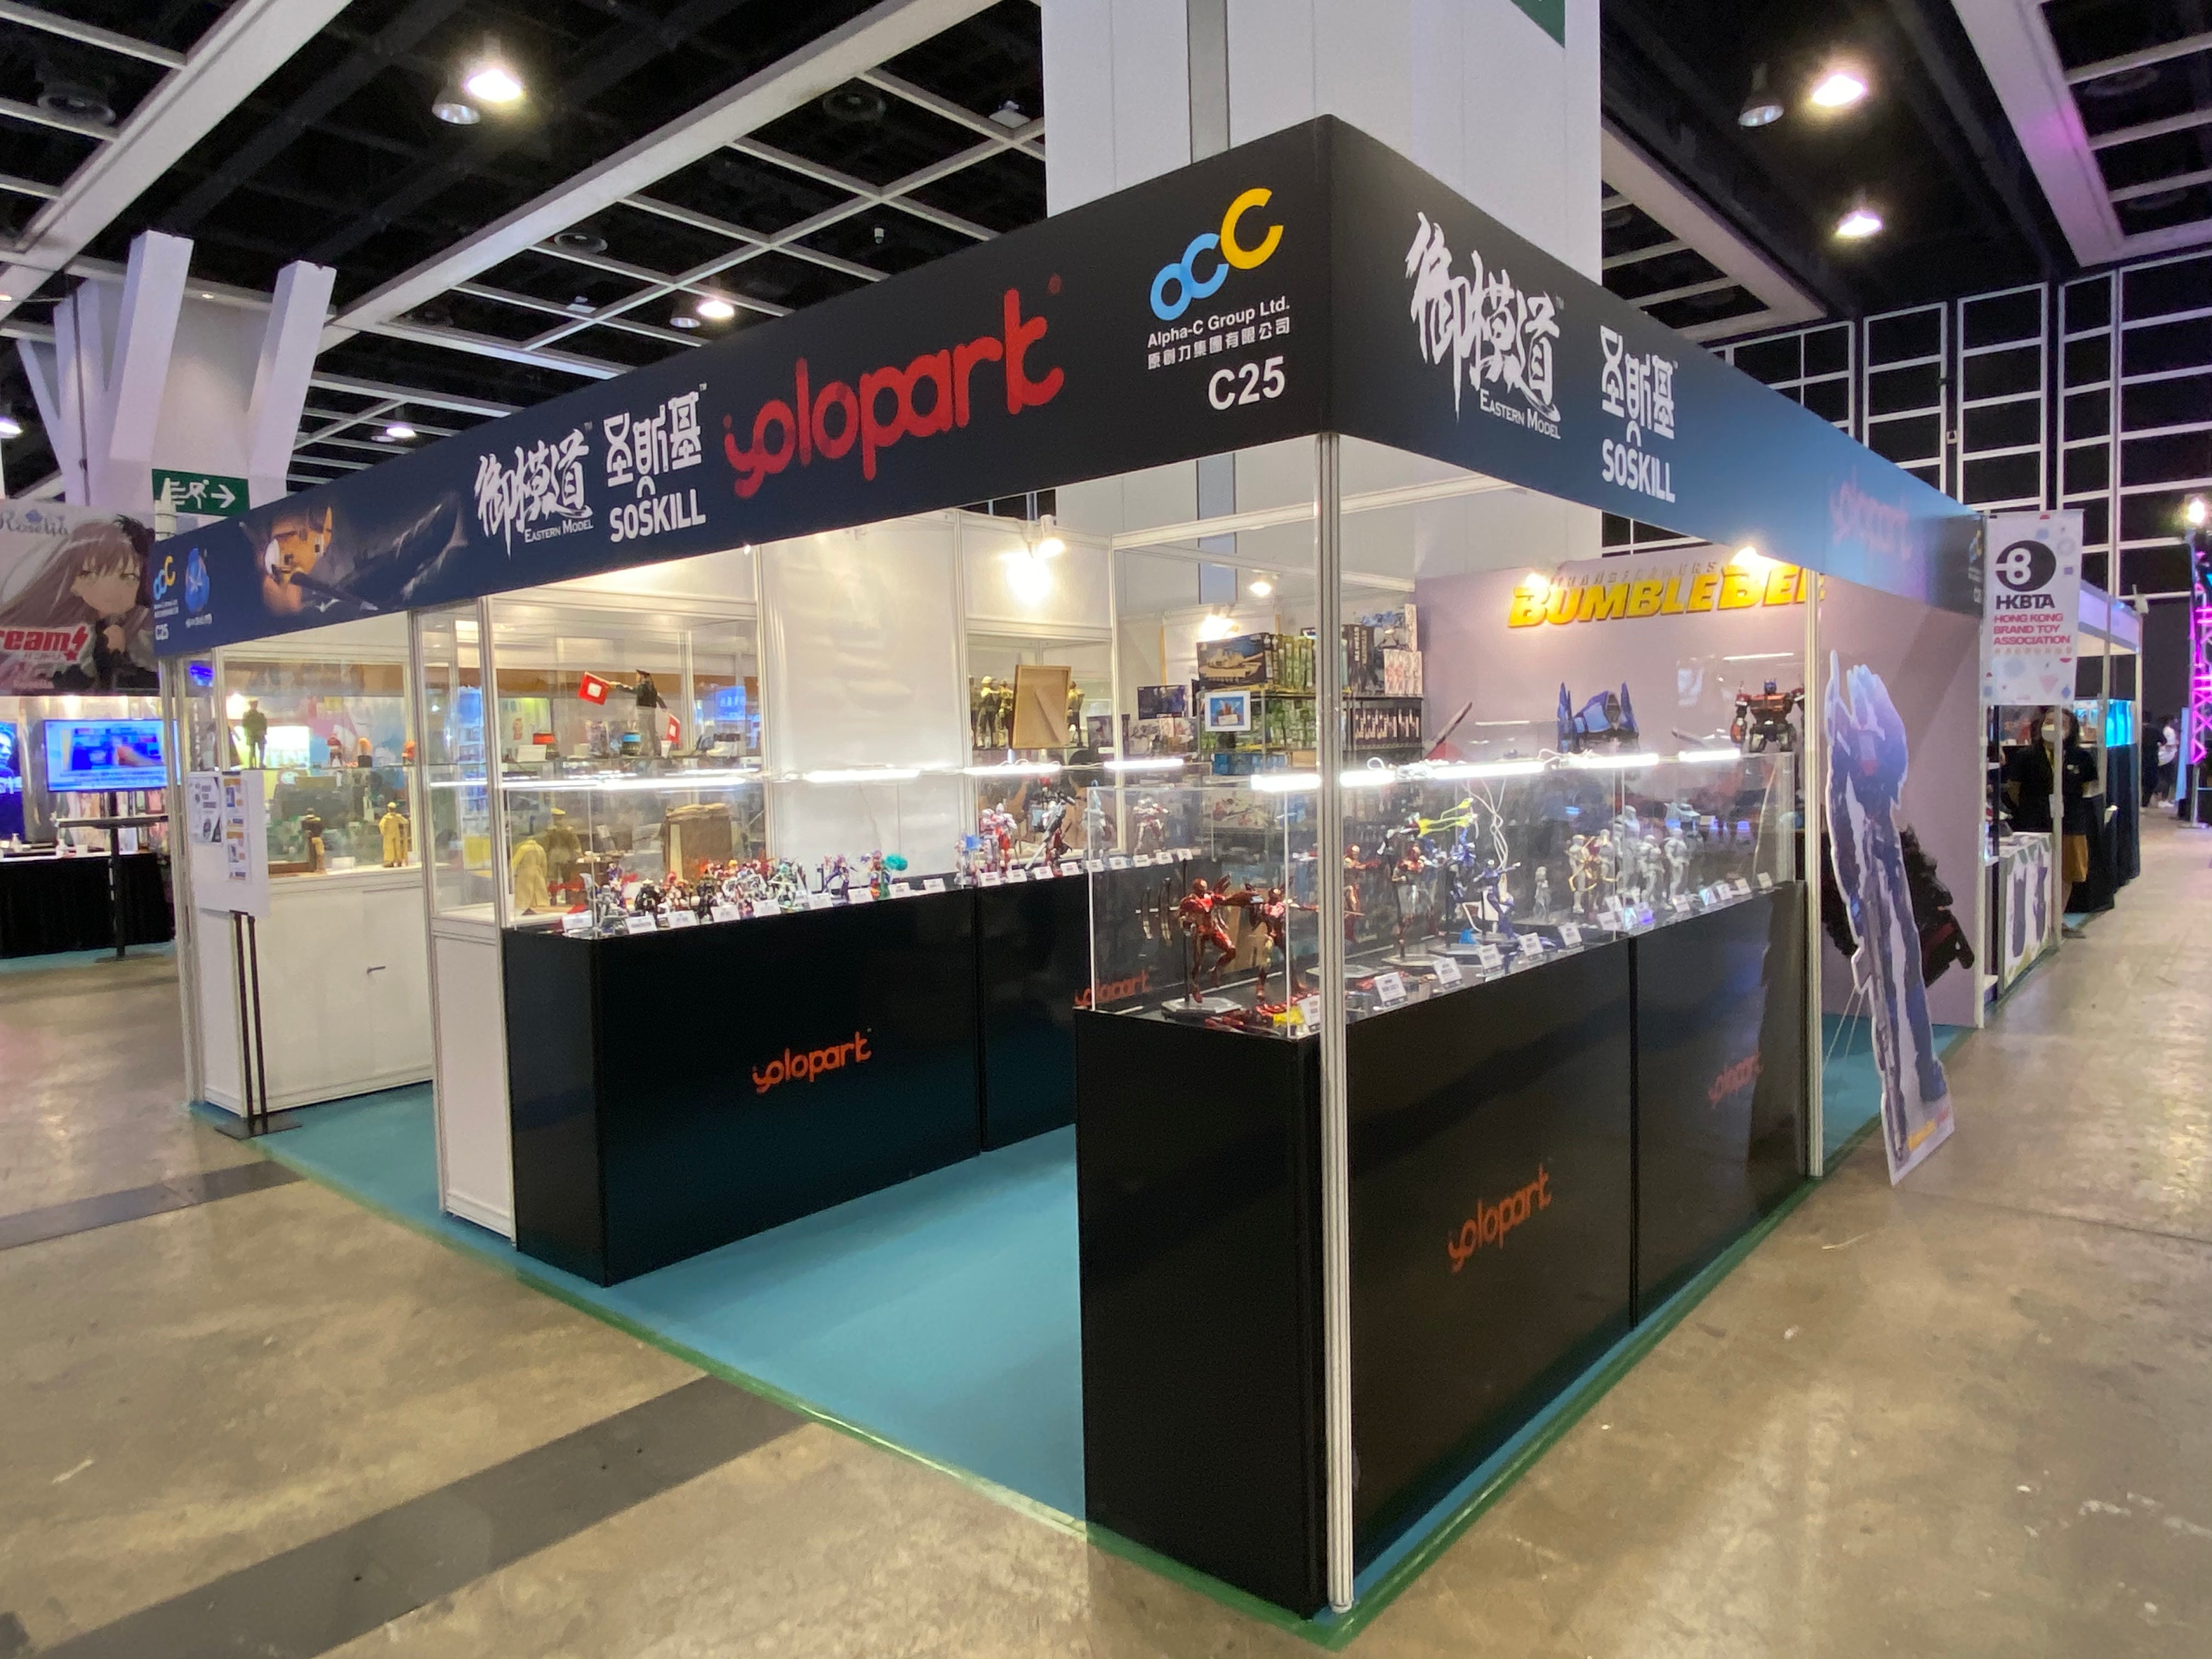 Review of YOLOPARK booth in ACGHK 2021 - Yolopark